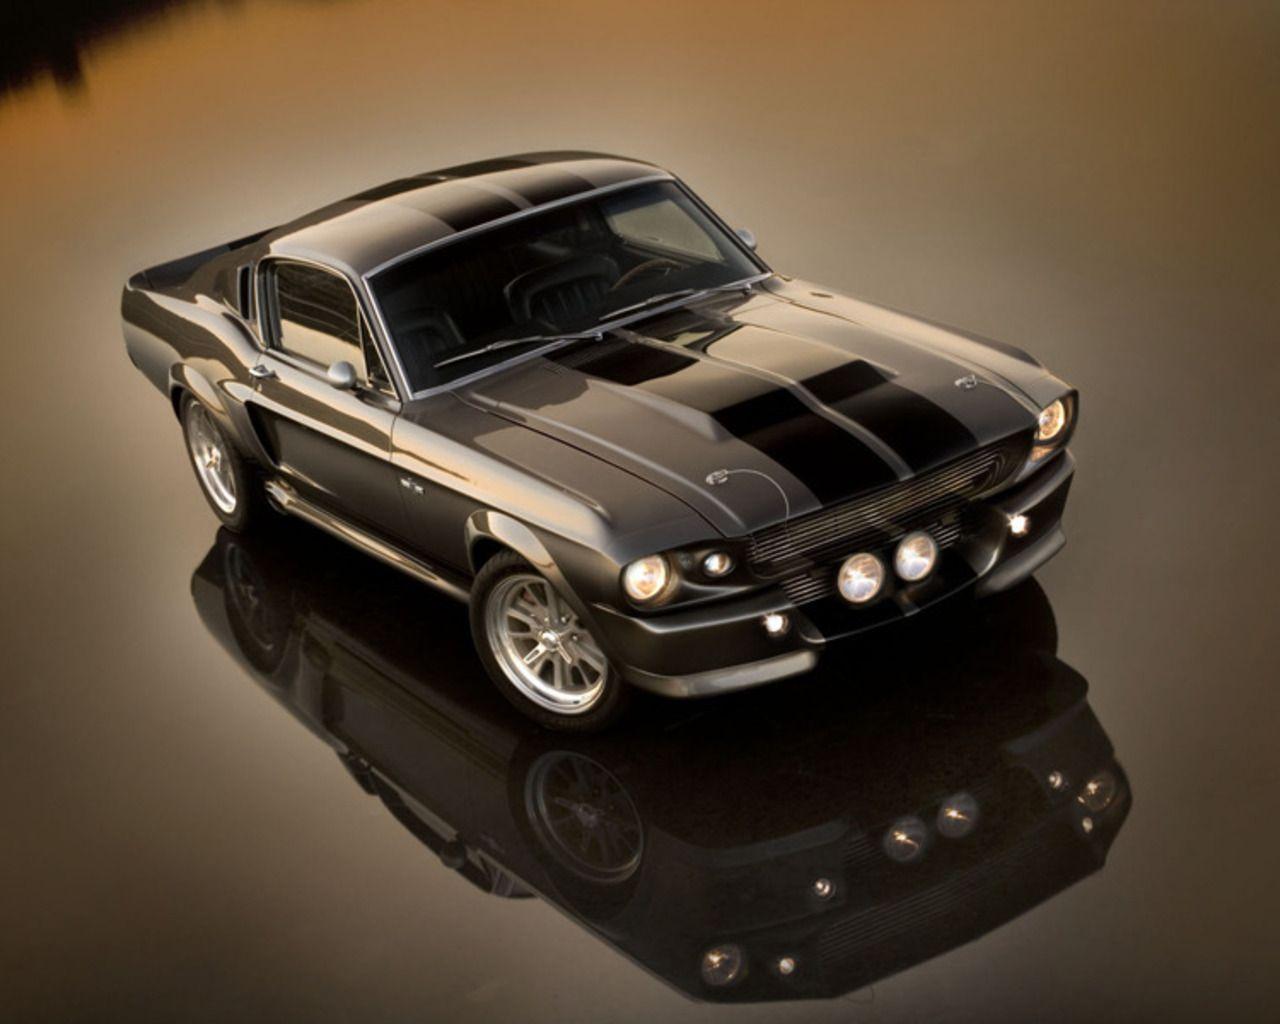 Ford Mustang 1960 Shelby Wallpapers 4k, HD Ford Mustang 1960 Shelby